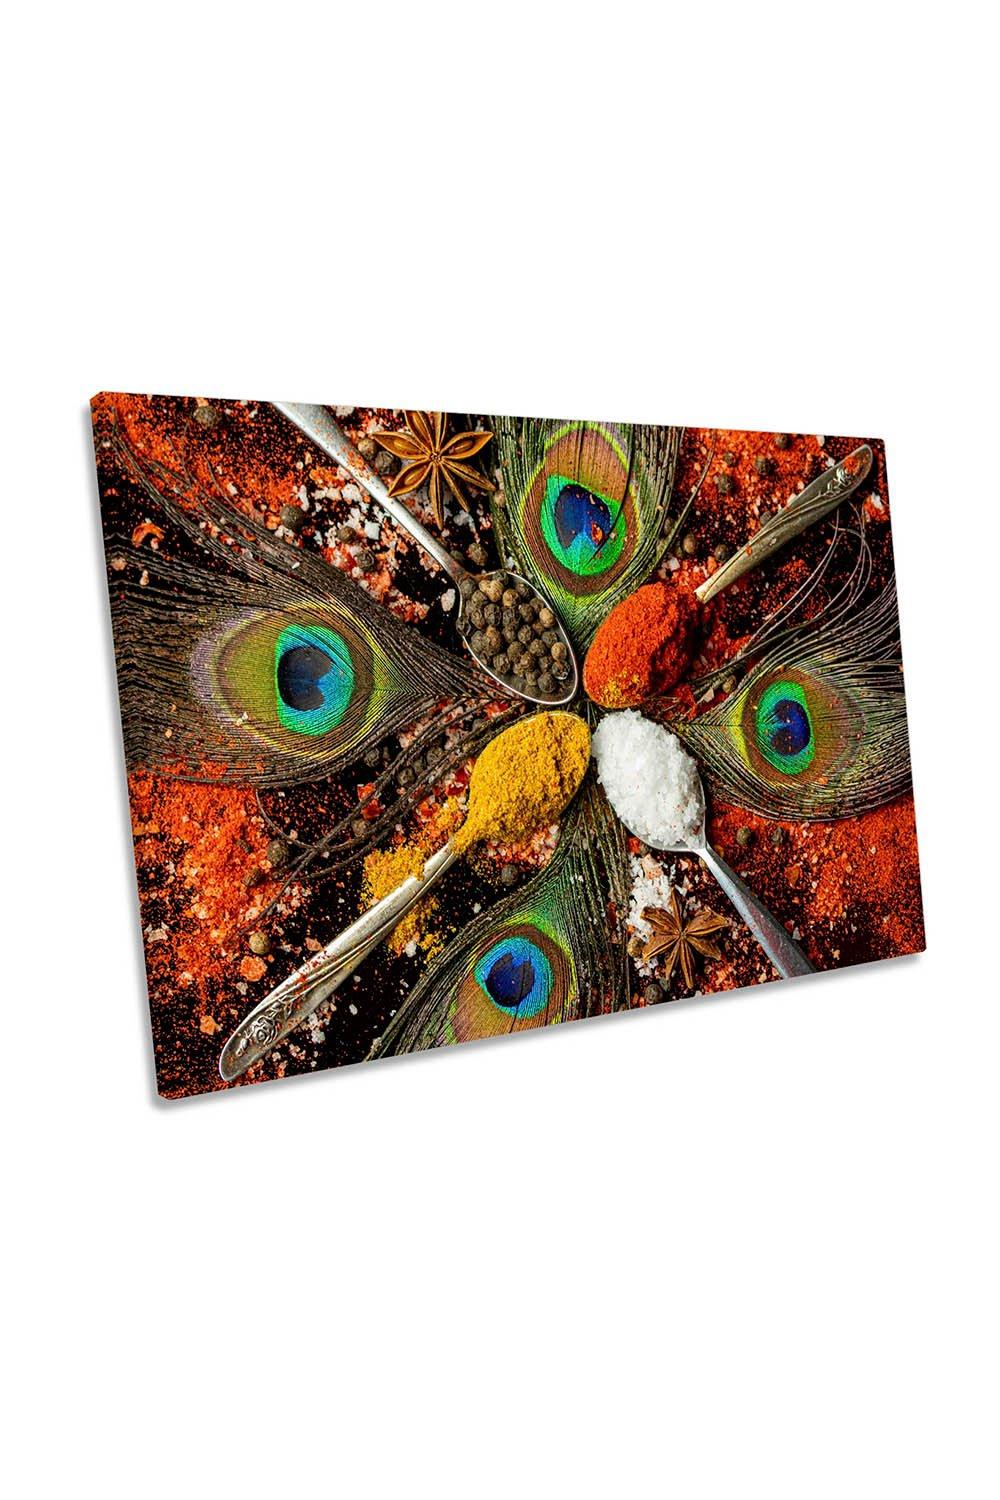 Peacock Feather Spoons Spices Kitchen Canvas Wall Art Picture Print